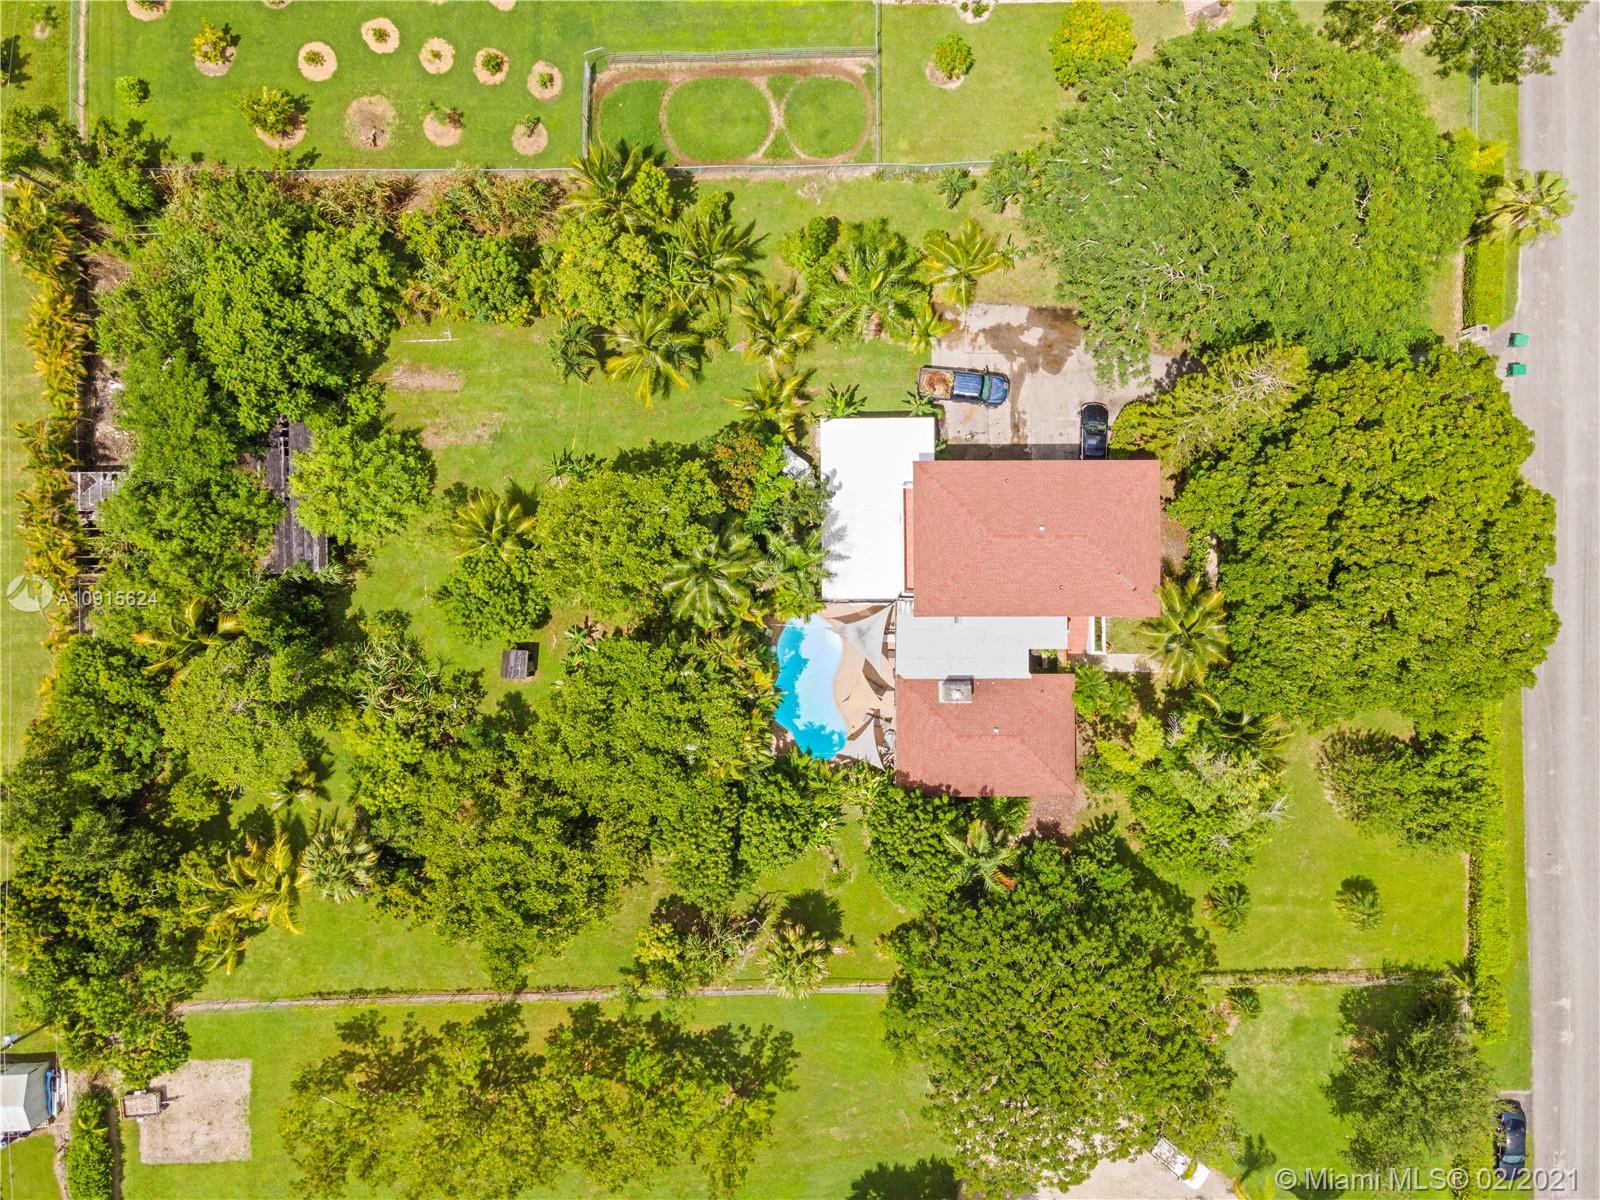 FOOTPRINT VIEW OF THE 1.25 ACRE 4/3/2 POOL HOME AGRICULTURALLY EXEMPT